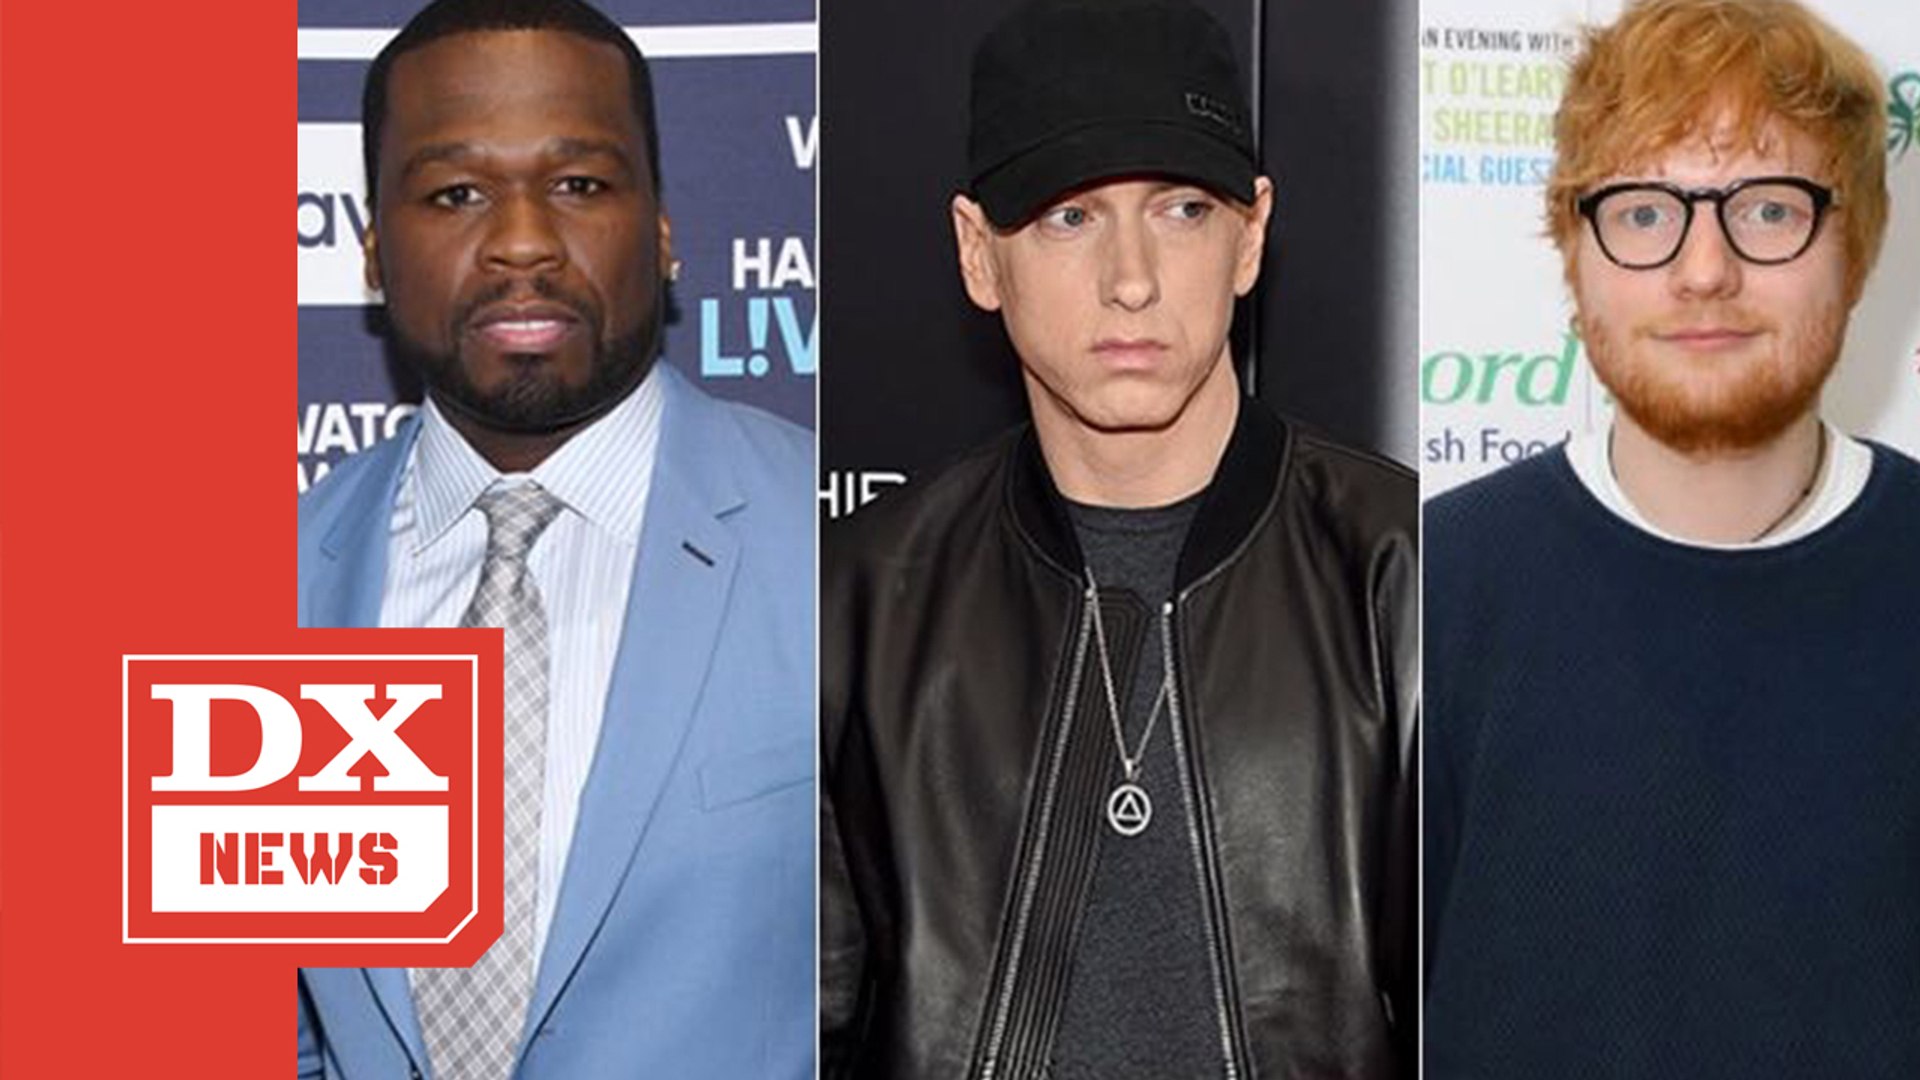 50 Cent Says Record With Eminem & Ed Sheeran Is On The Way